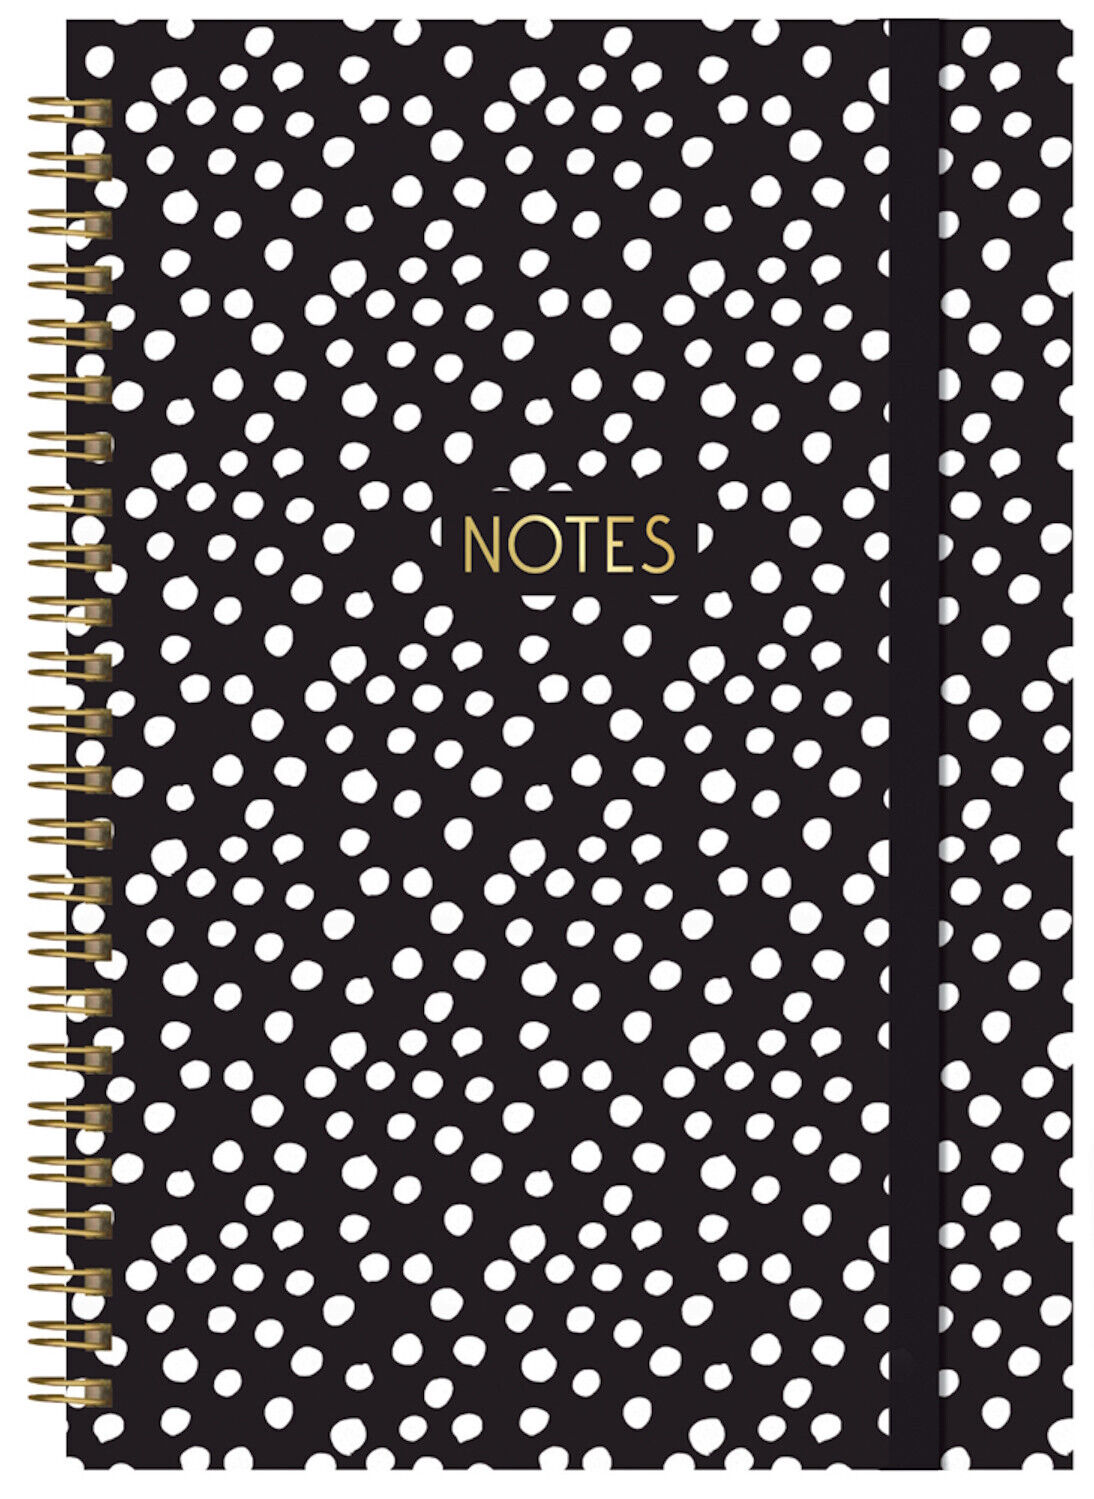 160 Page Black & White Polka Dots A5 Notebook Pad